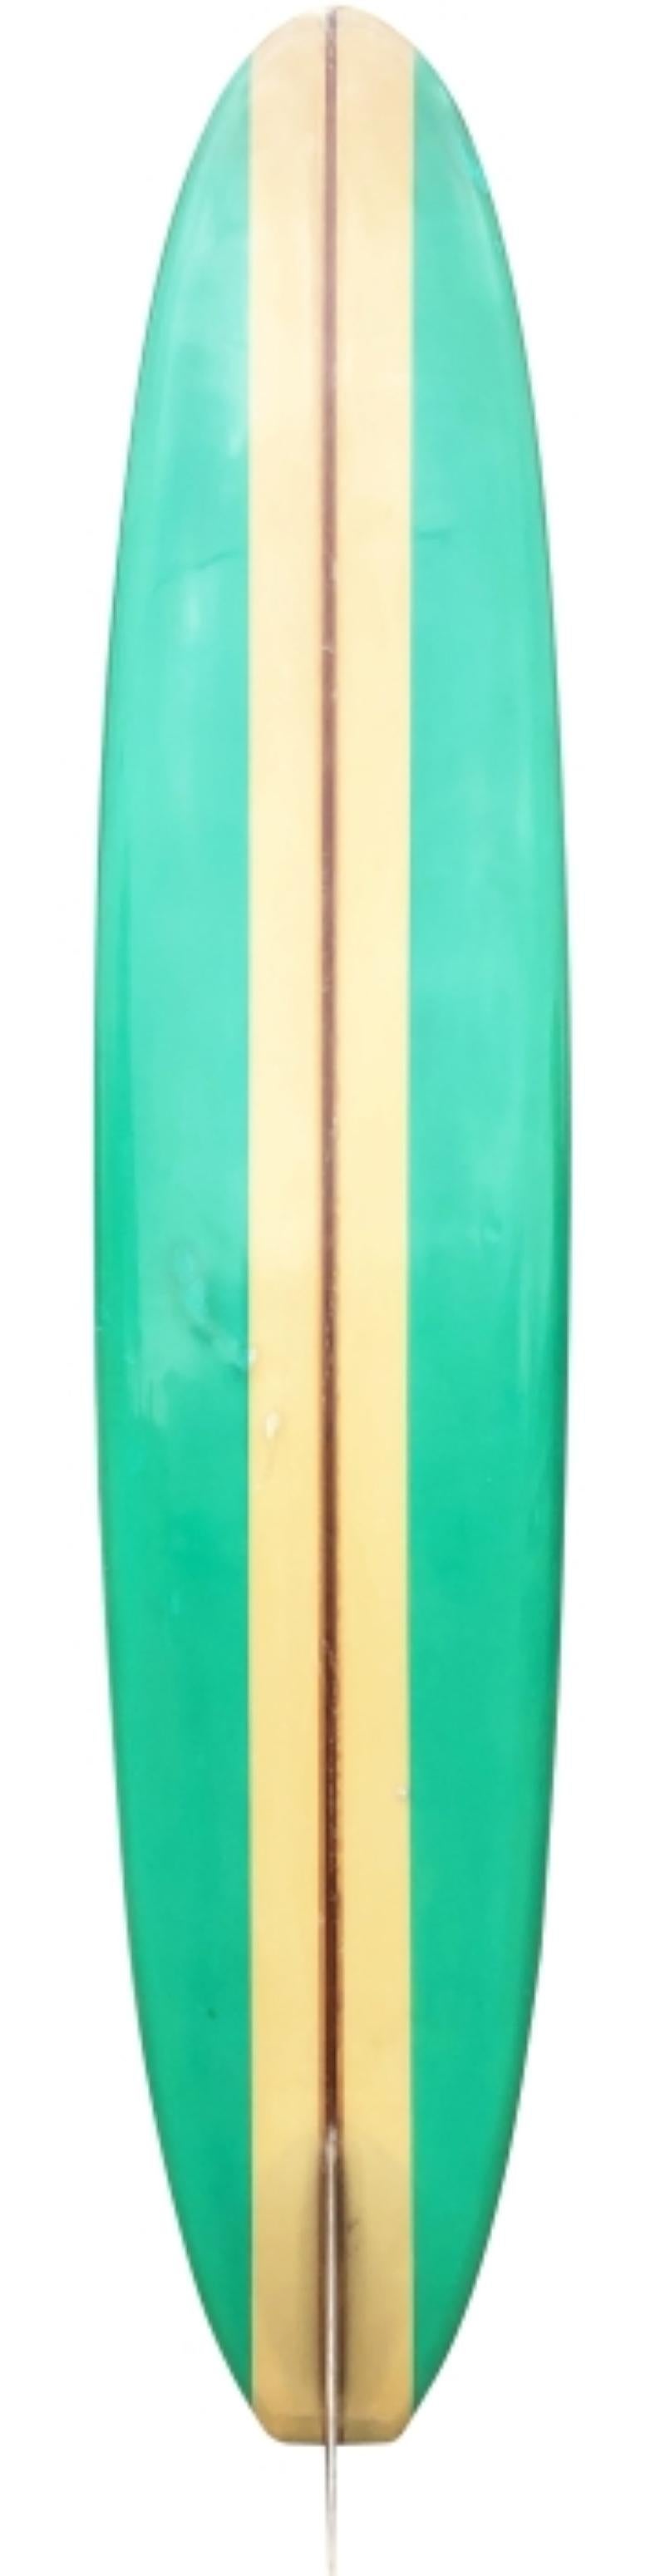 Early 1960s Dave Sweet custom longboard made in Santa Monica, California. Shaped by the late surfing Pioneer, Dave Sweet, (1929-2015). Features beautiful seafoam green panels with reverse T-band stringer design. Finished with a remarkable 11-piece